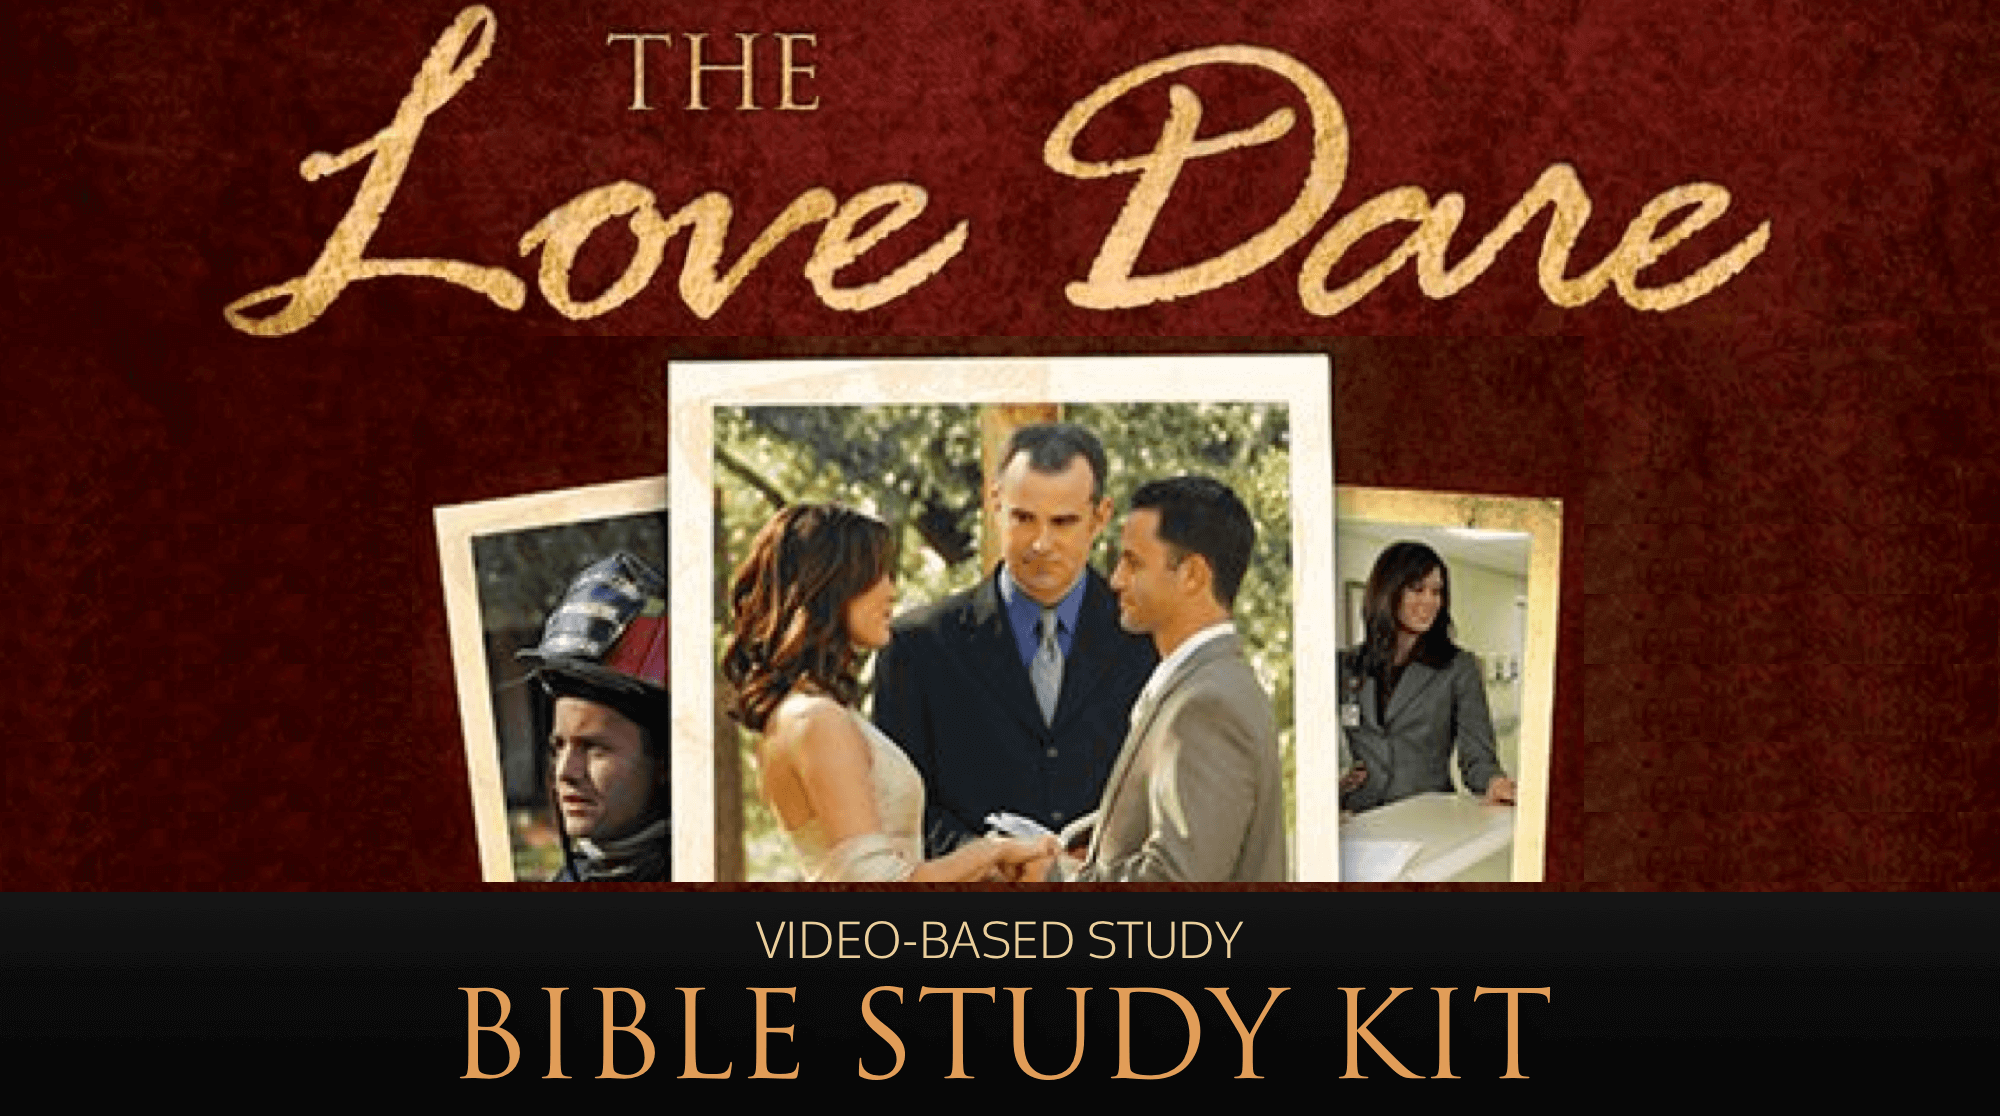 best-christian-Bible-courses-studies-The-Love-Dare-Fireproof-dvd-bible-study-kit